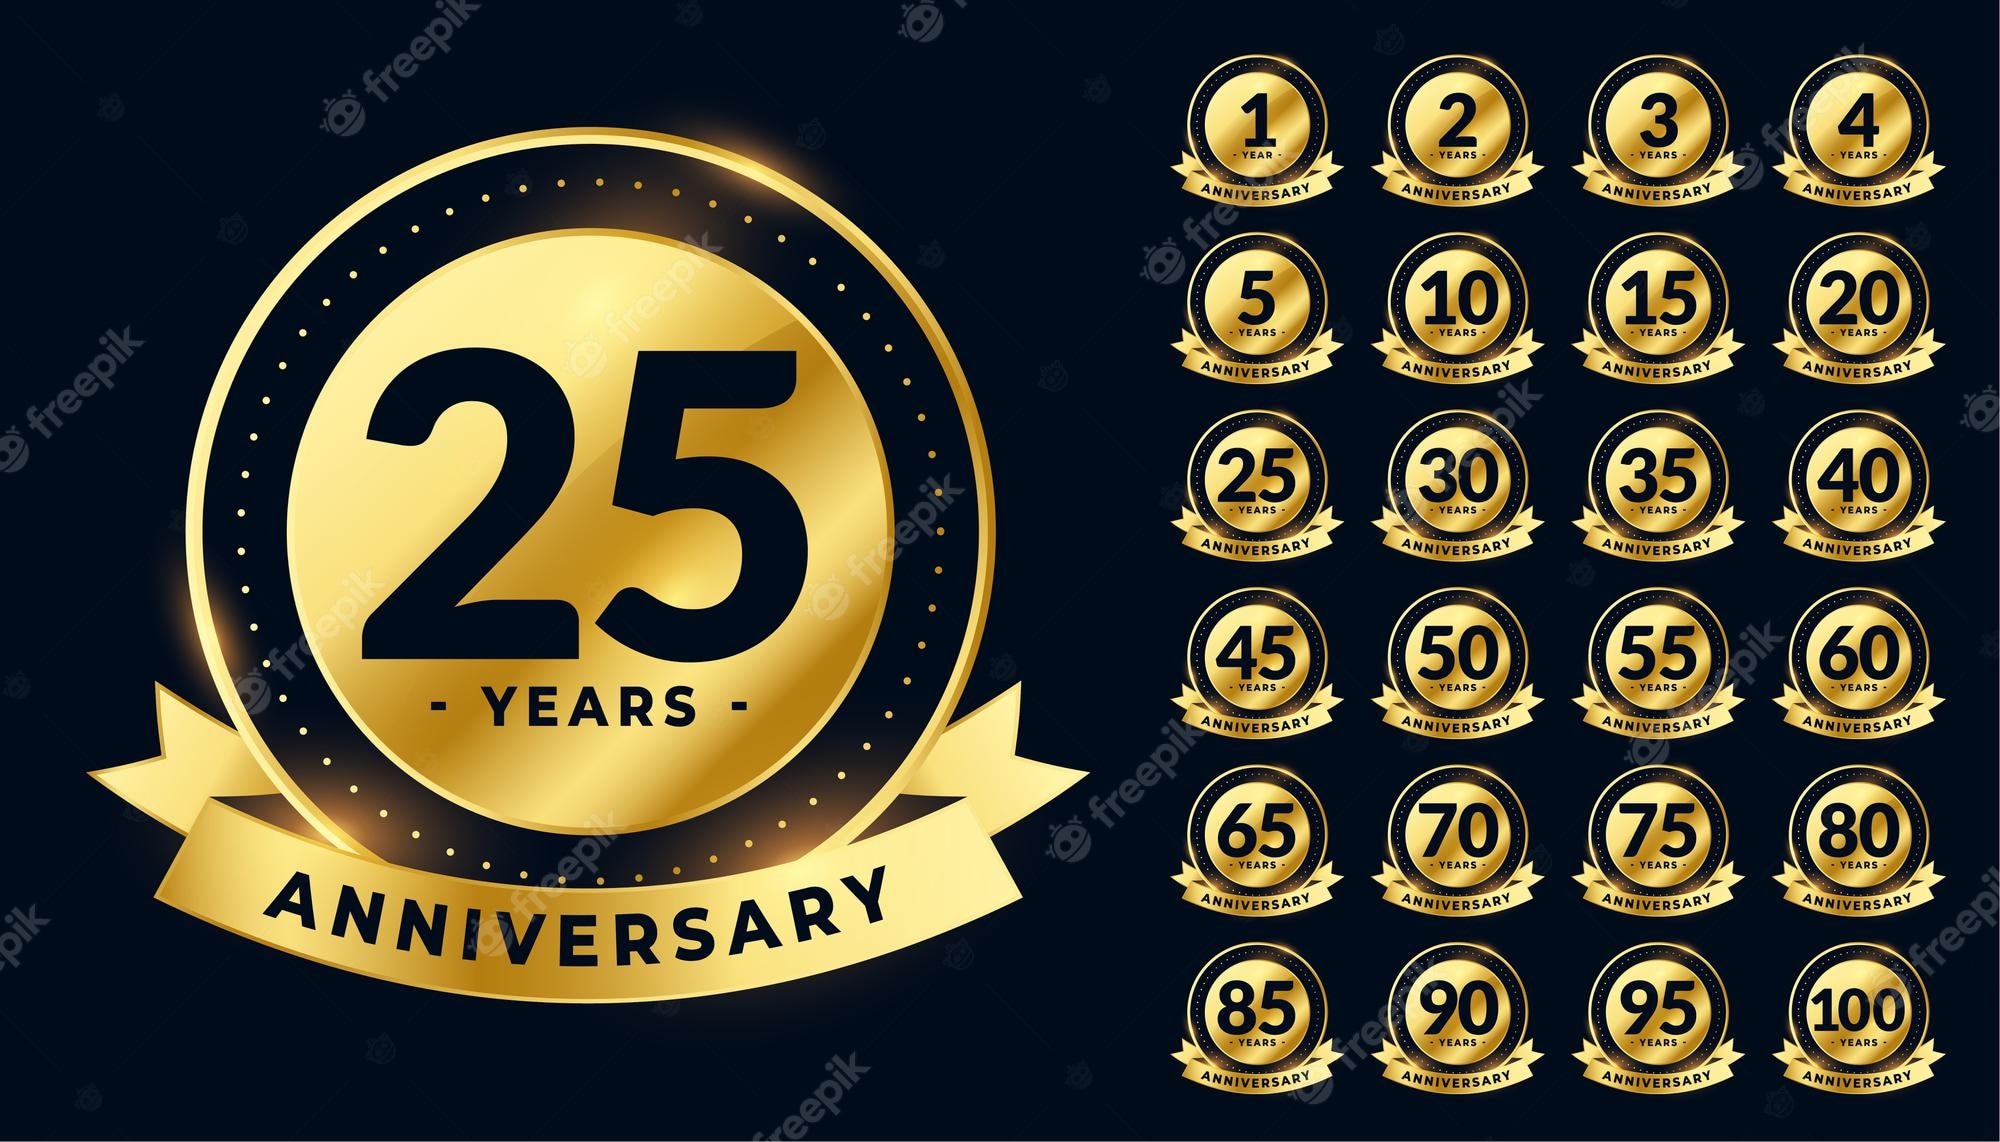 Isolated abstract golden 25th anniversary logo Vector Image